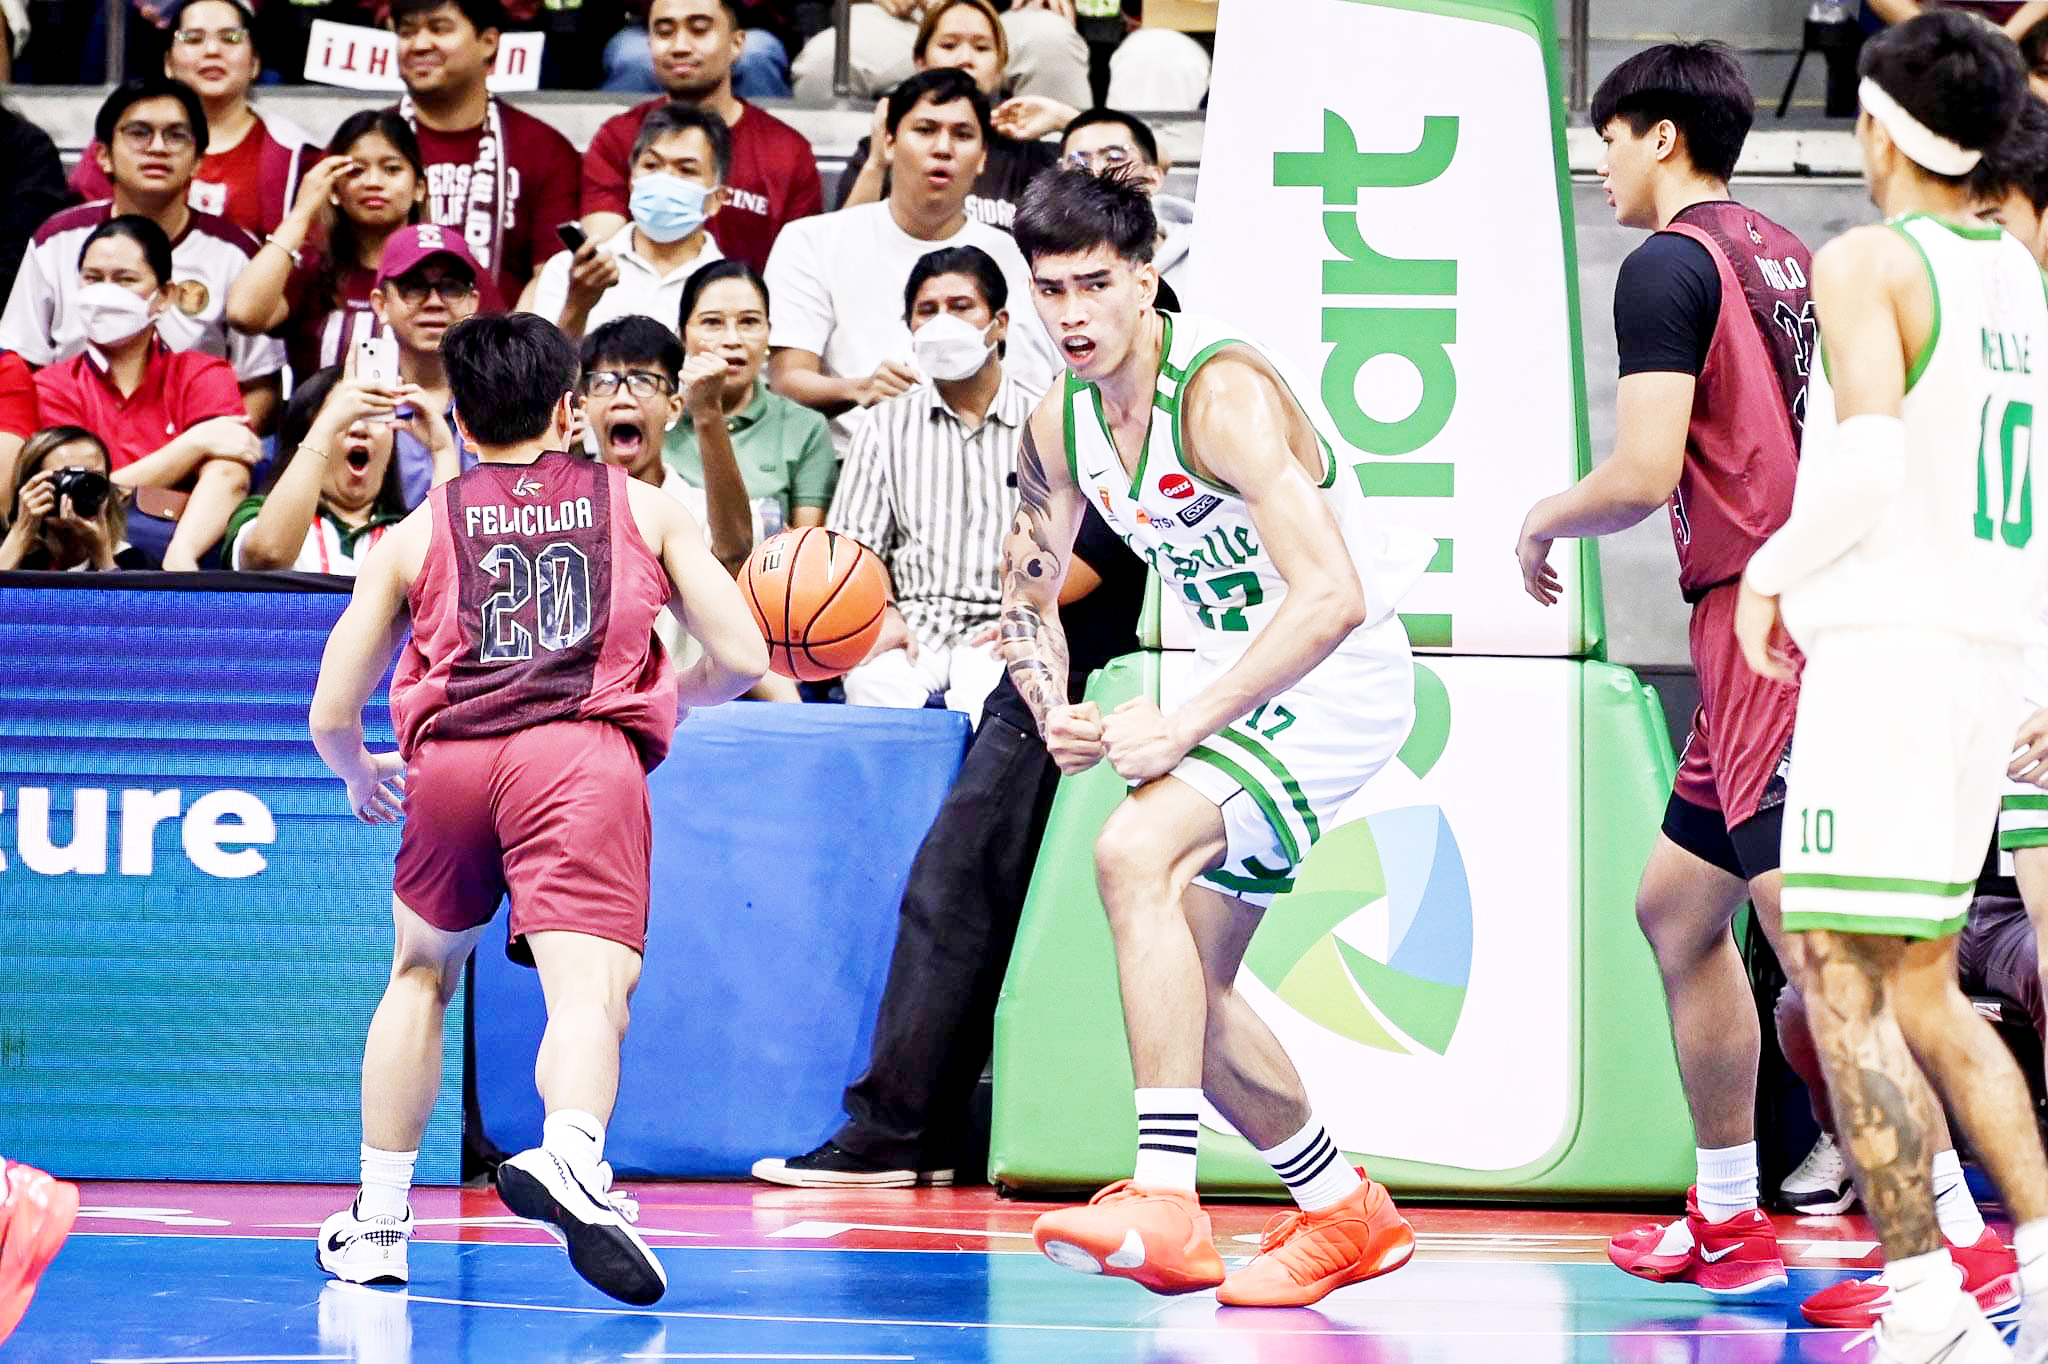 Sa Game 3 ng UAAP finals… THE WINNER TAKES IT ALL!